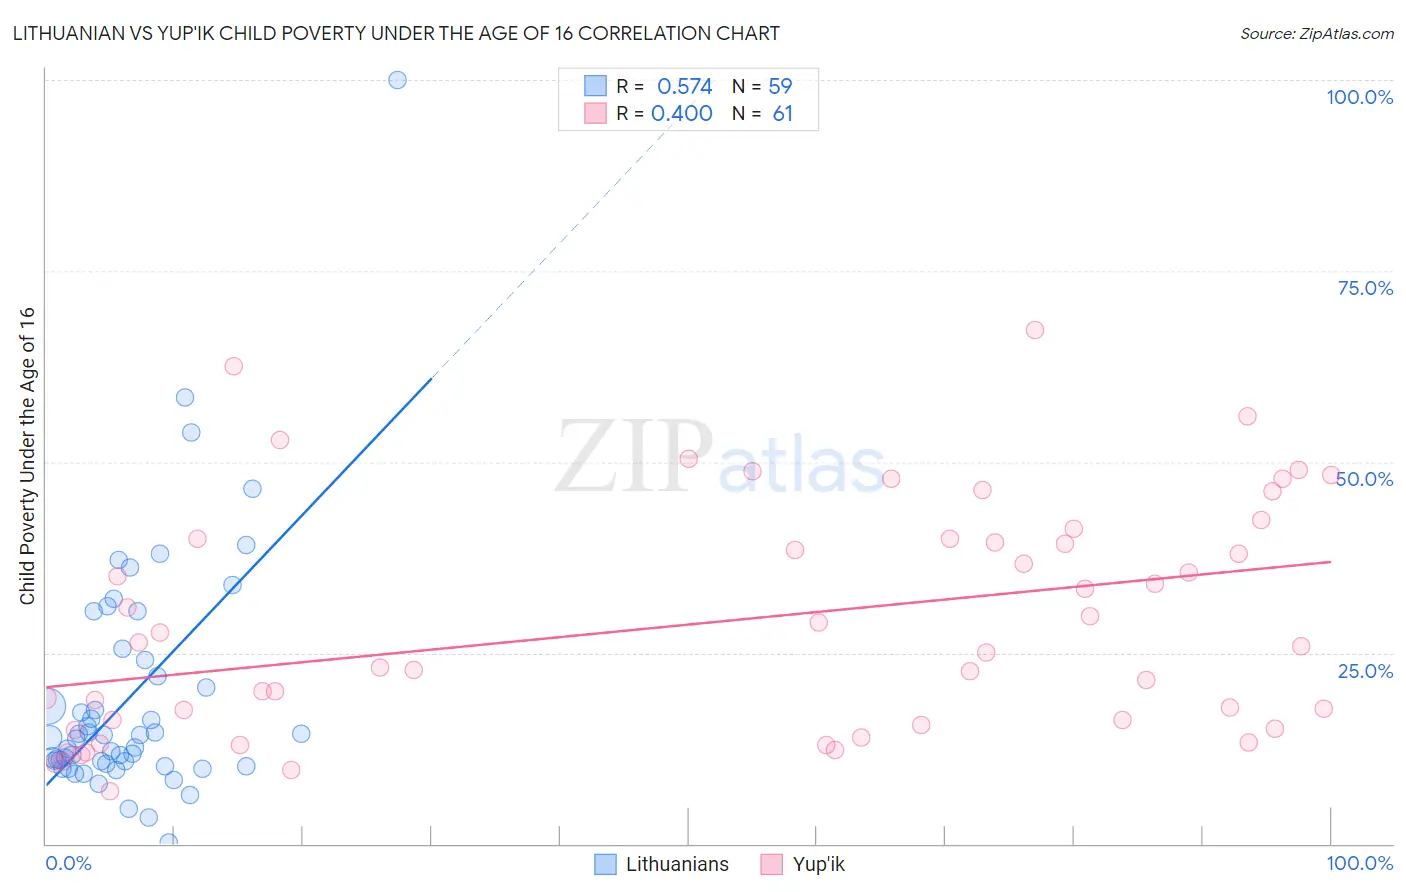 Lithuanian vs Yup'ik Child Poverty Under the Age of 16